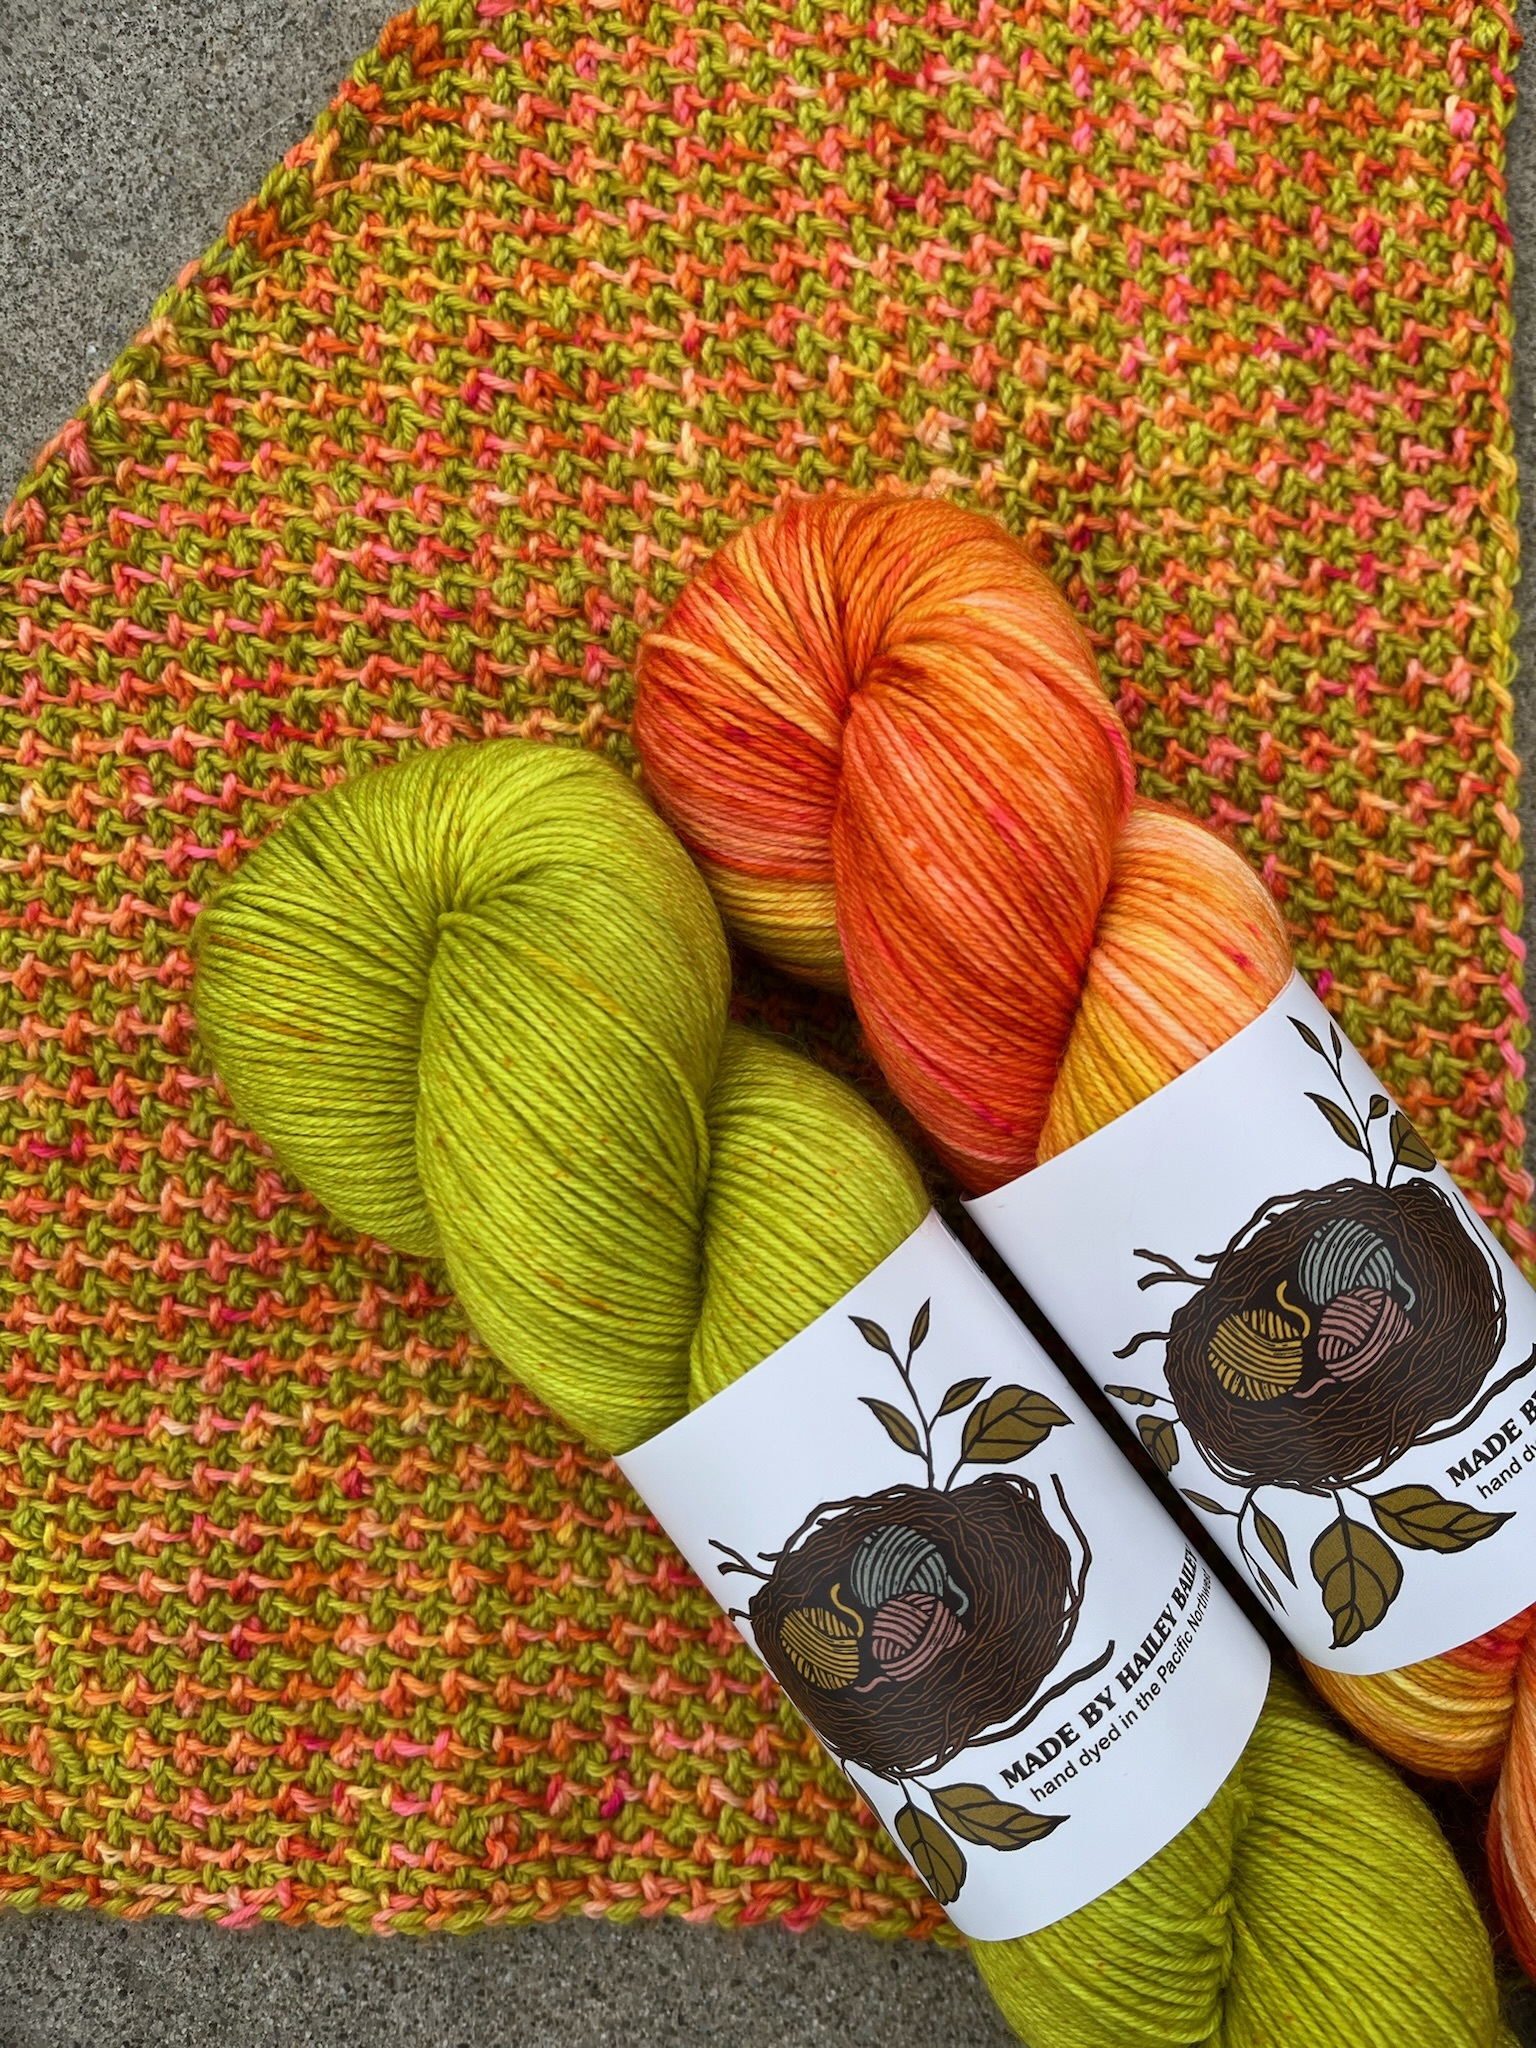 Two skeins of Made by Hailey Bailey yarn, in custom colorways Sprout and Flourish, shown with a sample made with these colorways